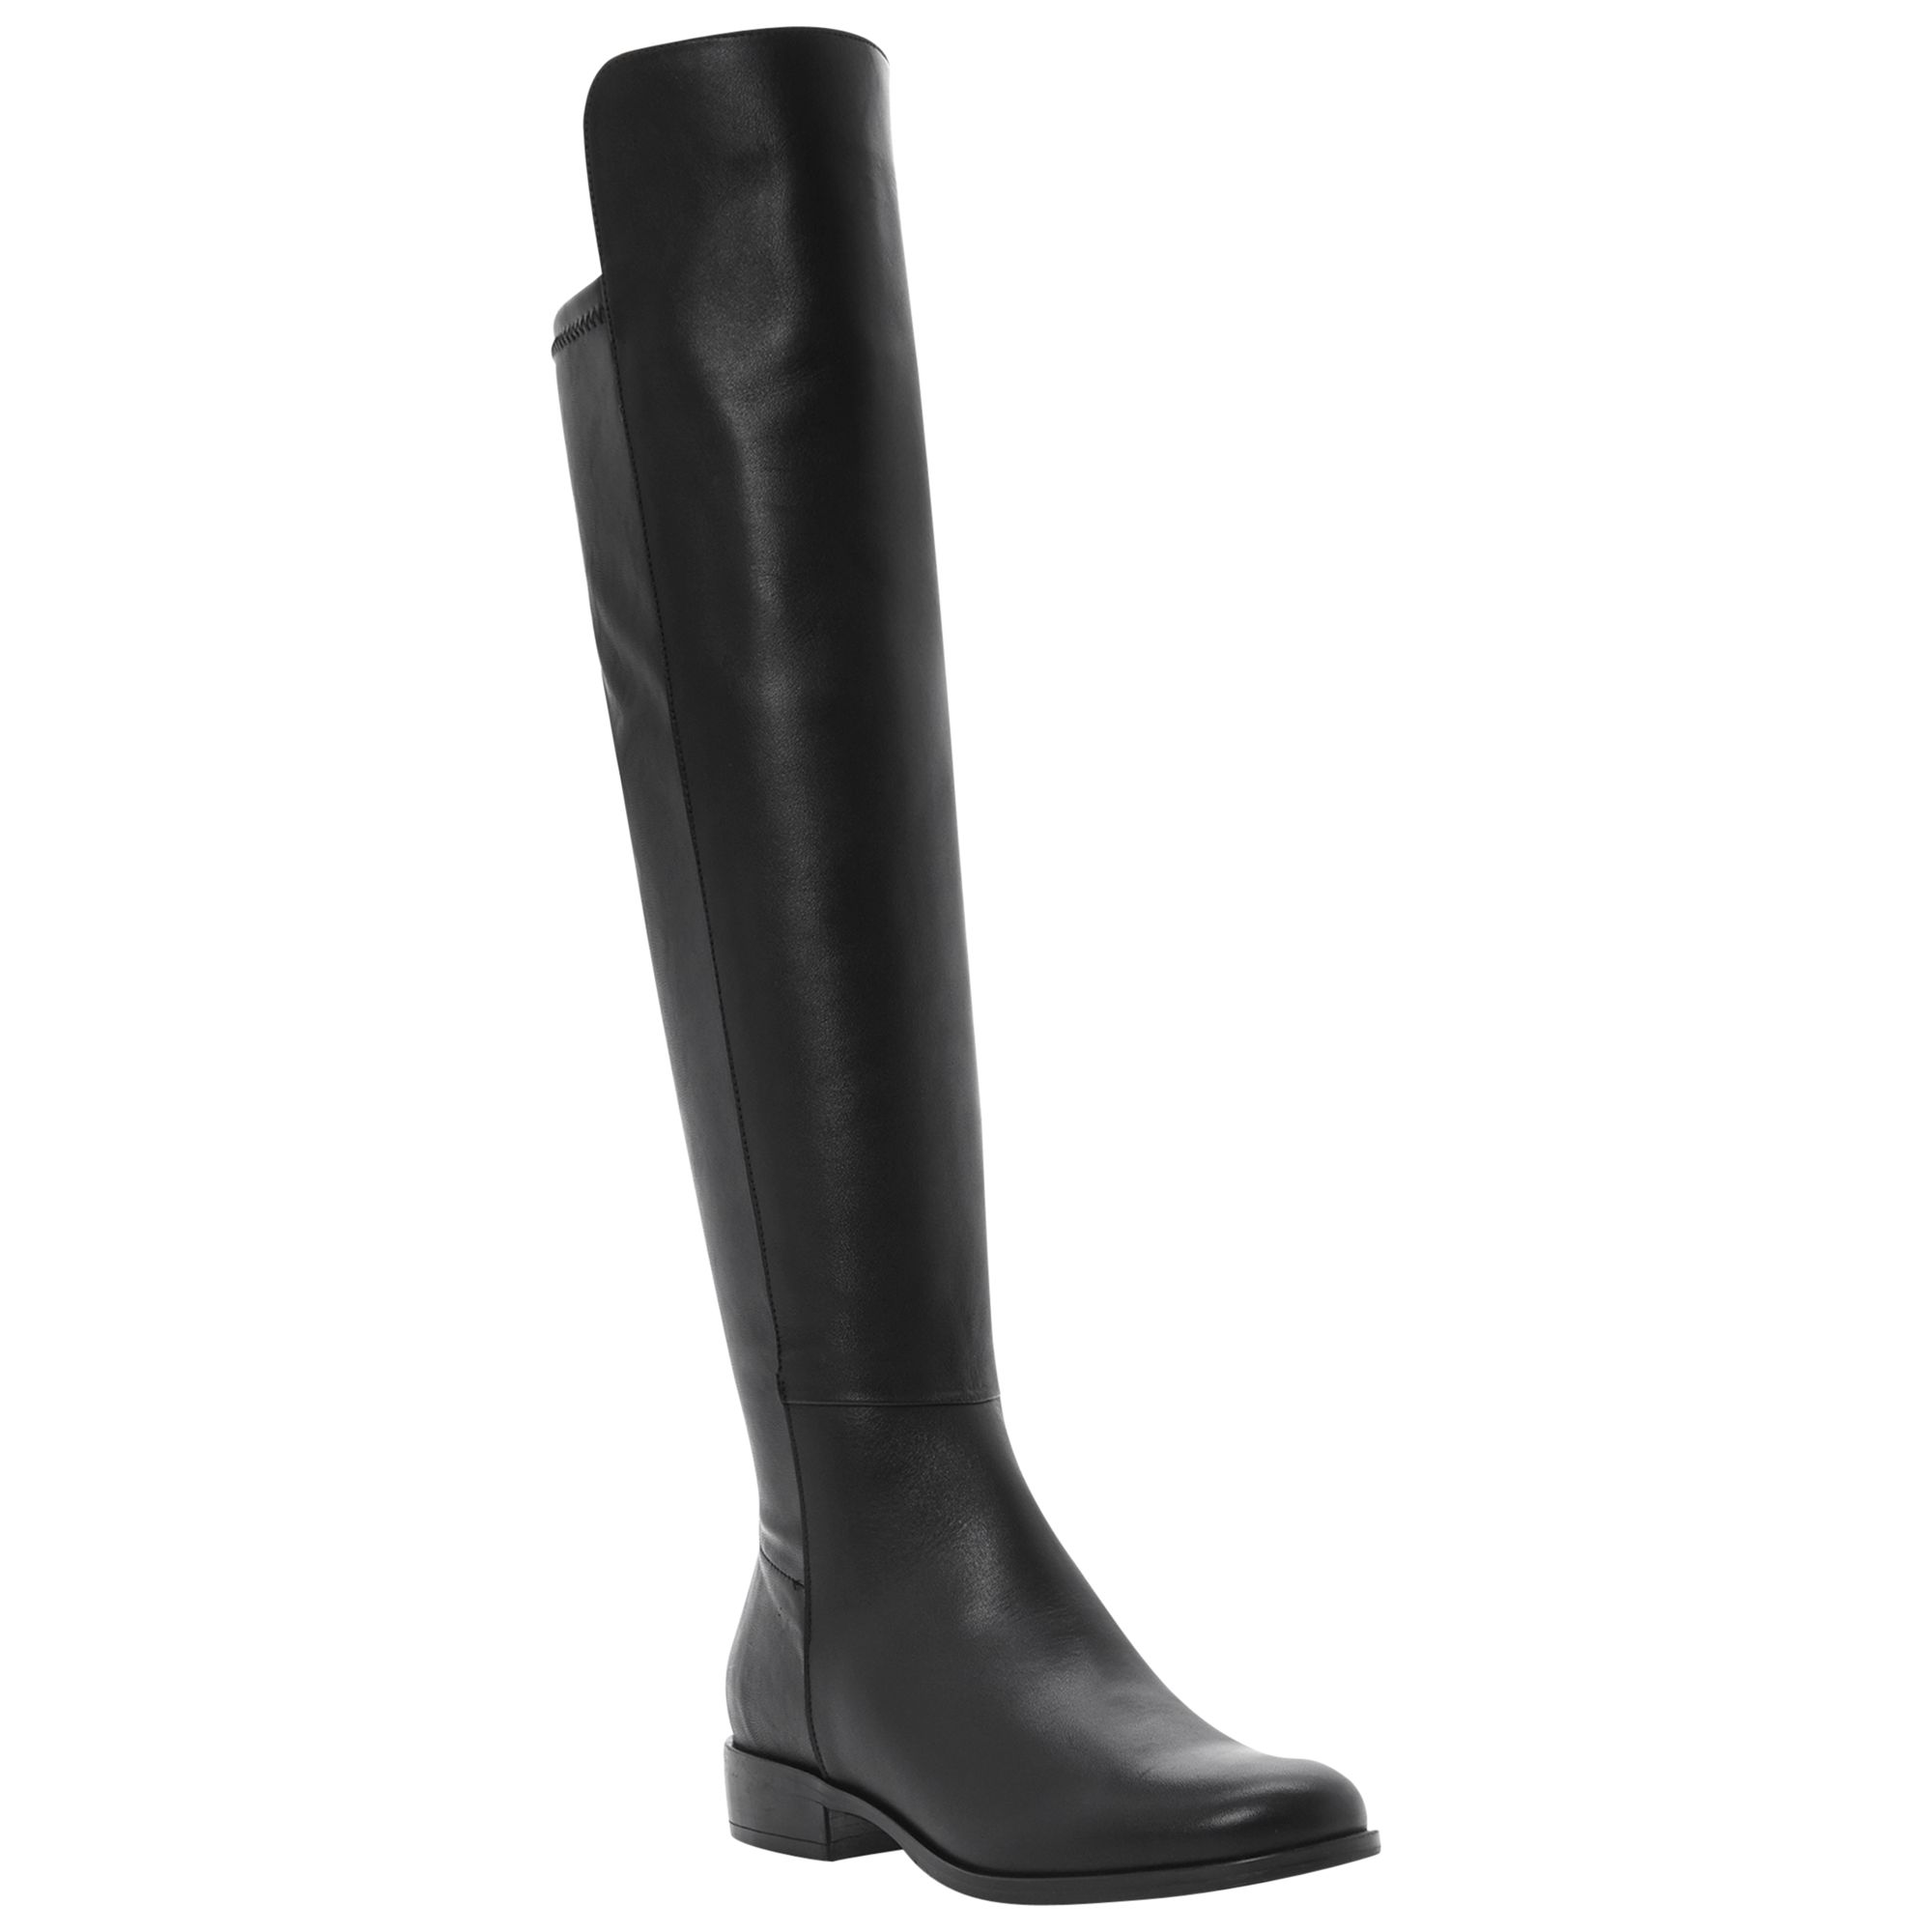 Dune Trish Over The Knee Boots, Black Leather